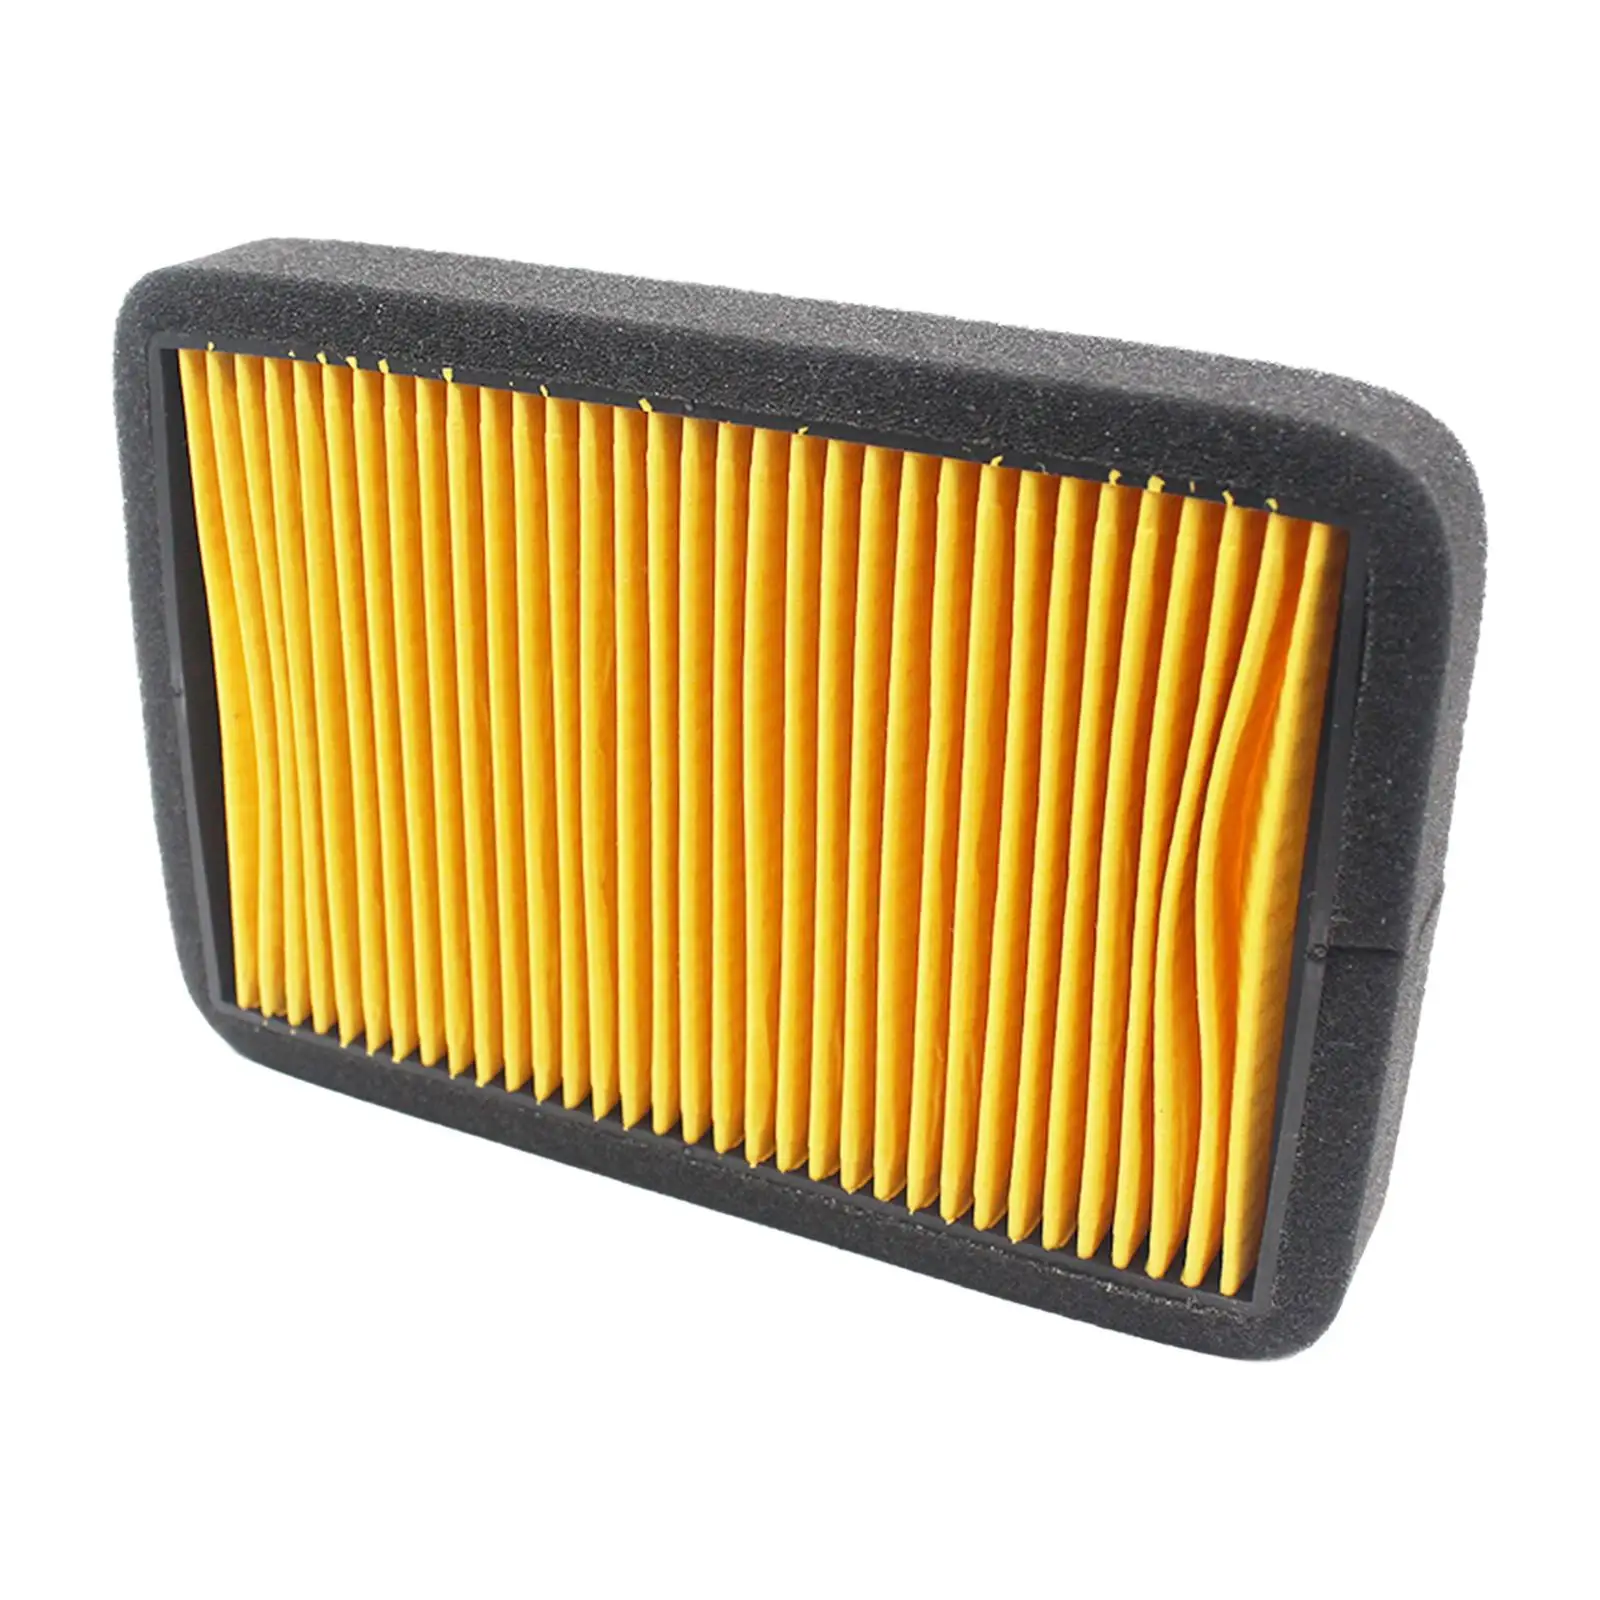 Air Filter Bj150-29A-29B Fit for Benelli 150cc 500cc 150 Easy to Install